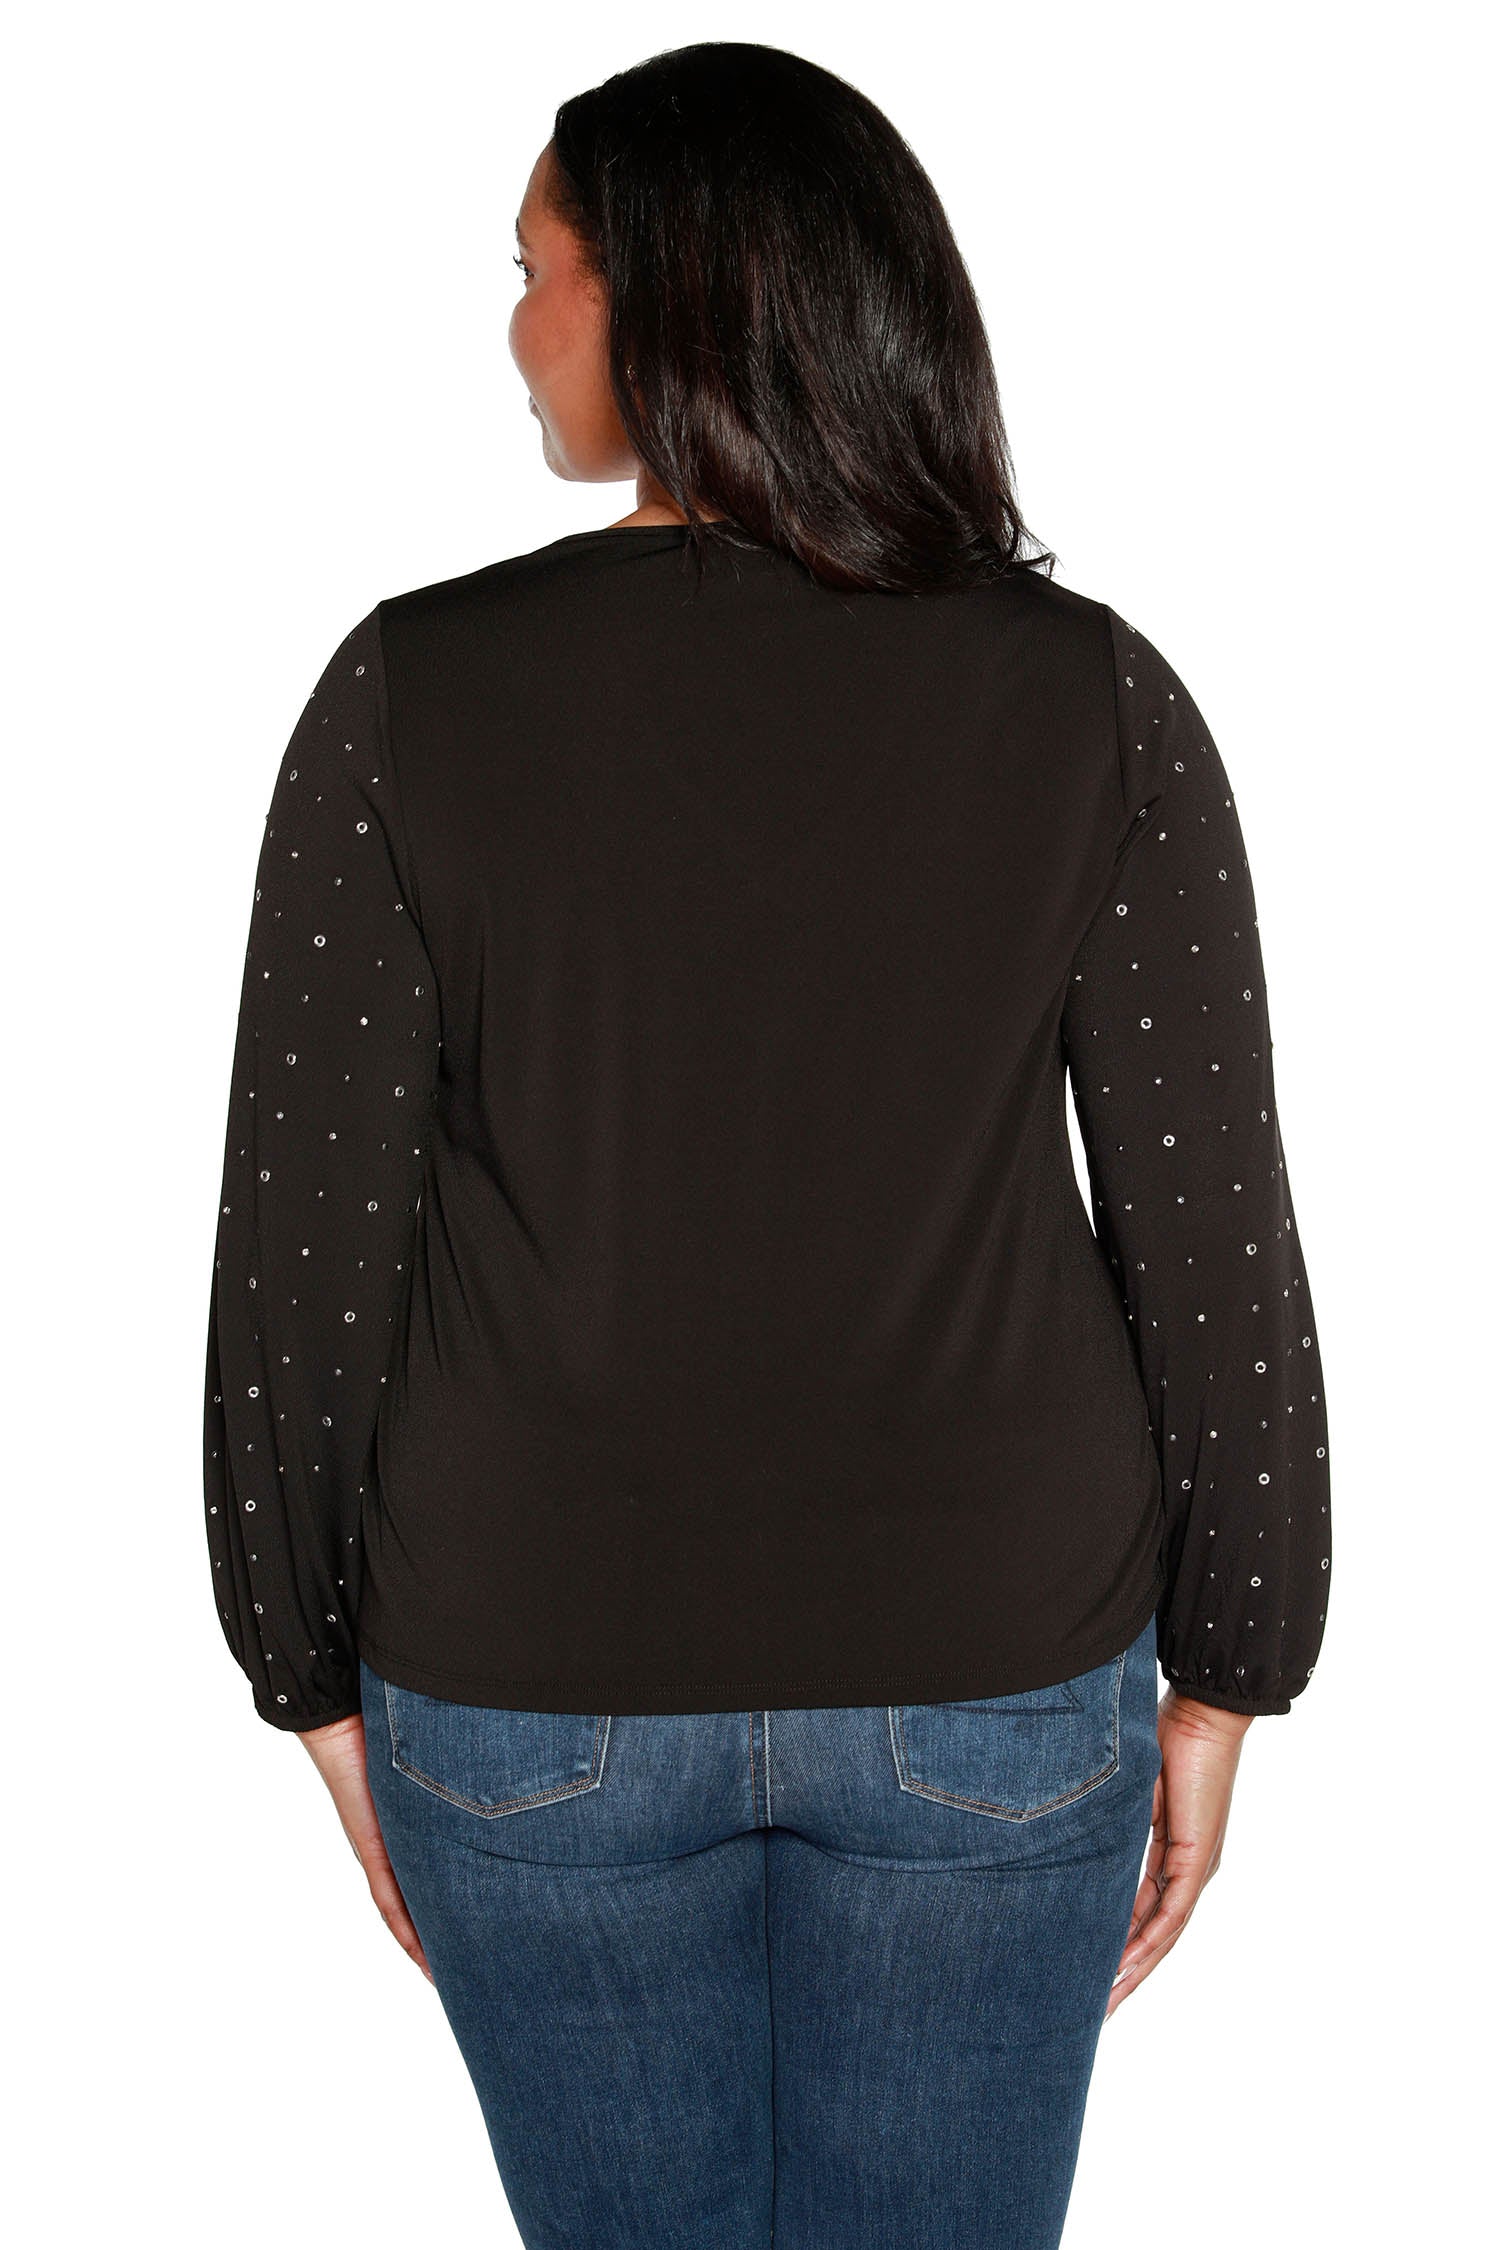 Women's V-neck Knit Blouse with Rhinestone and Grommet Statement Sleeves | Curvy